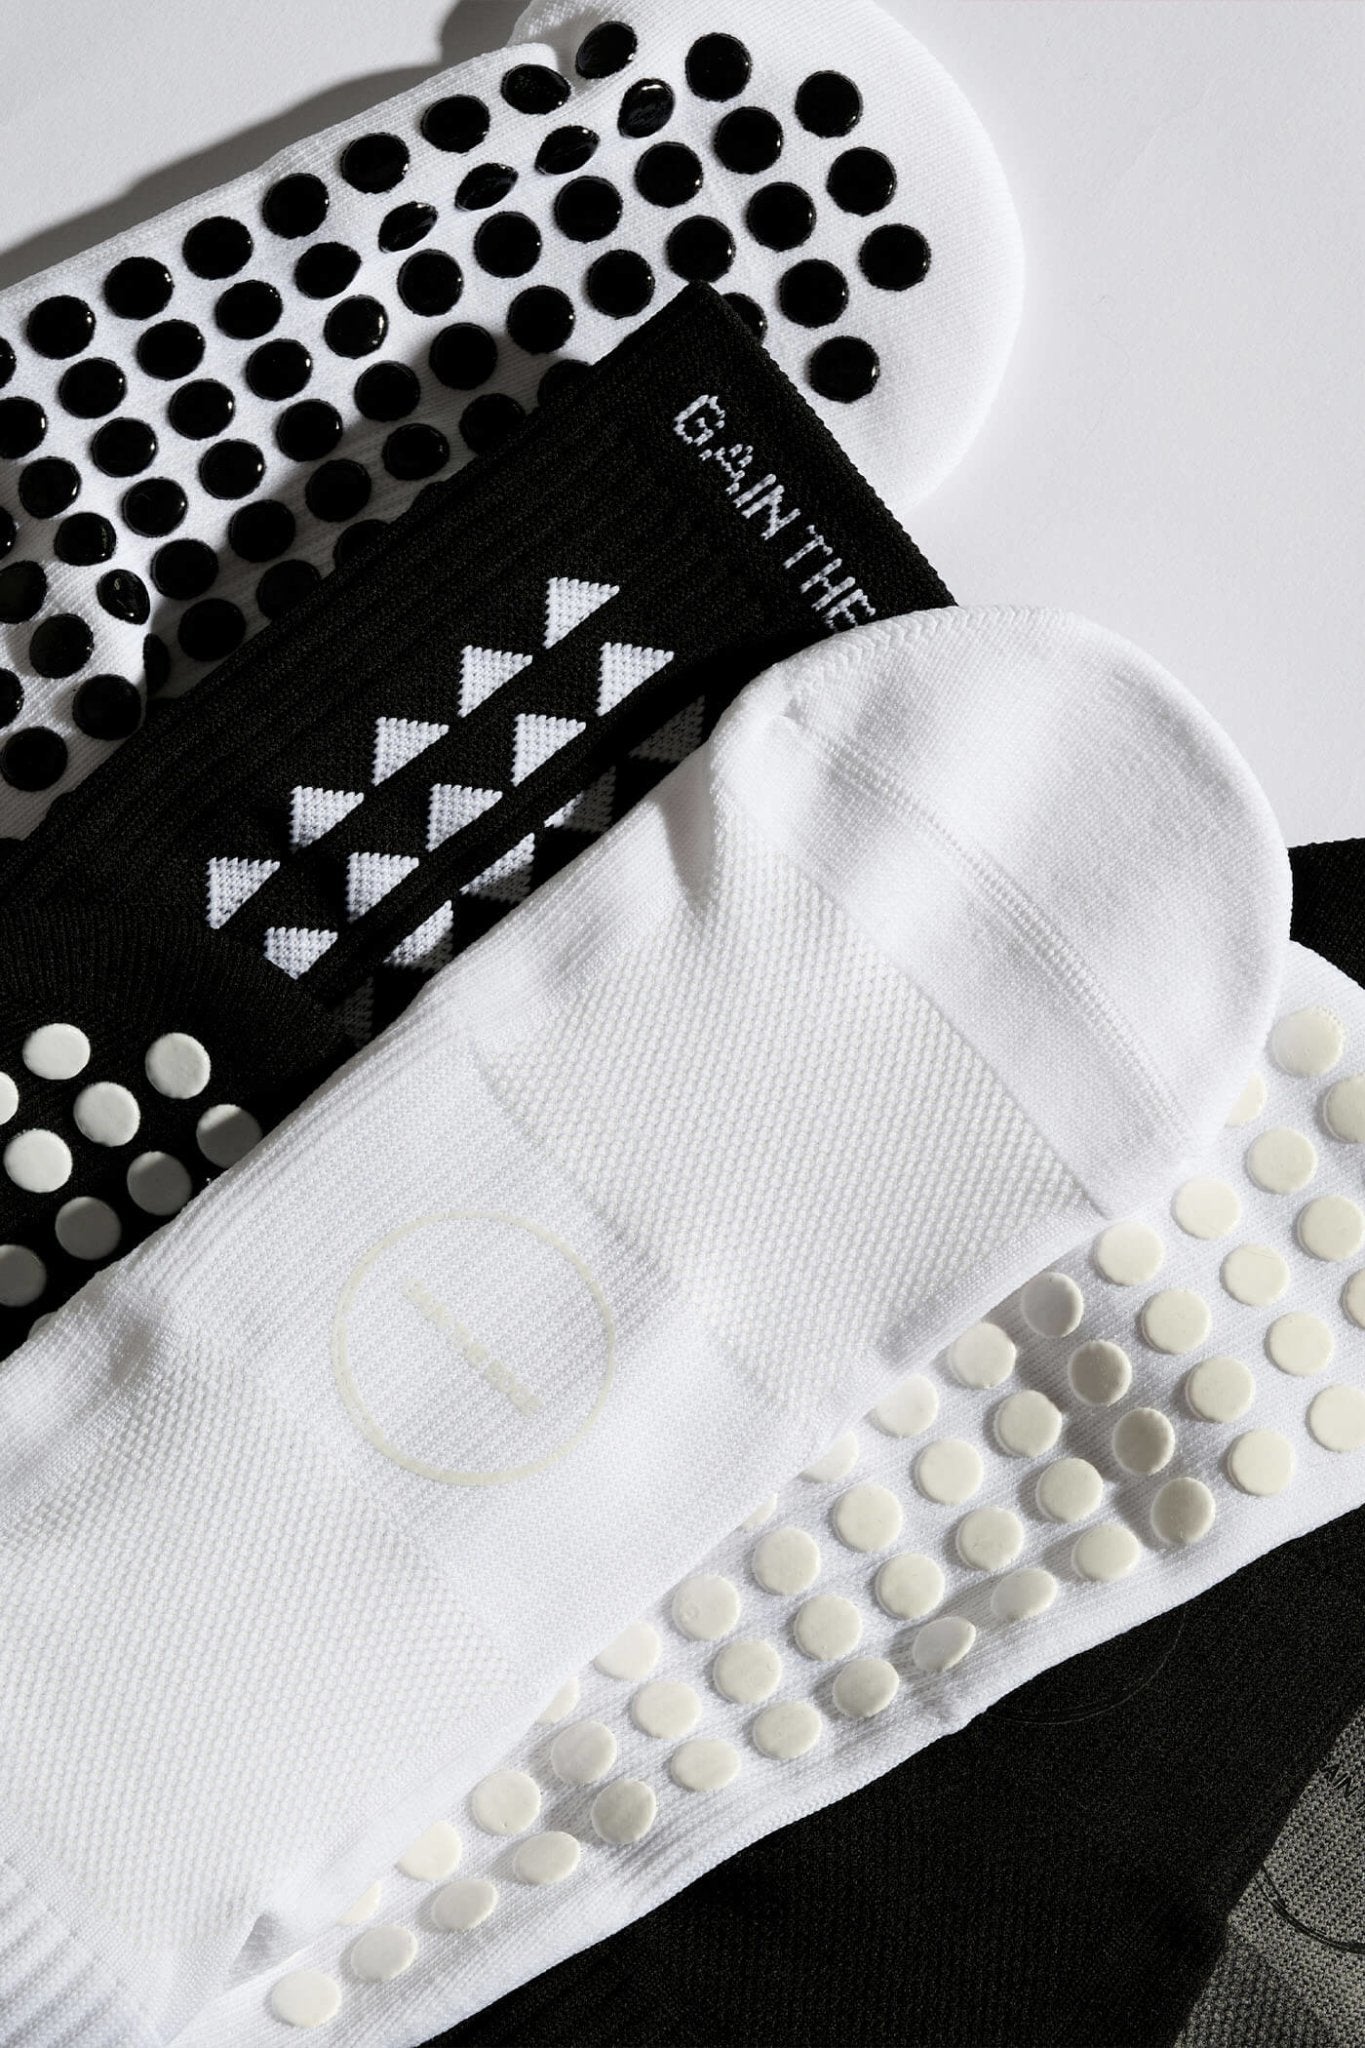 WHITEOUT LIMITED EDITION GRIP SOCKS 2.0 - Gain The Edge US